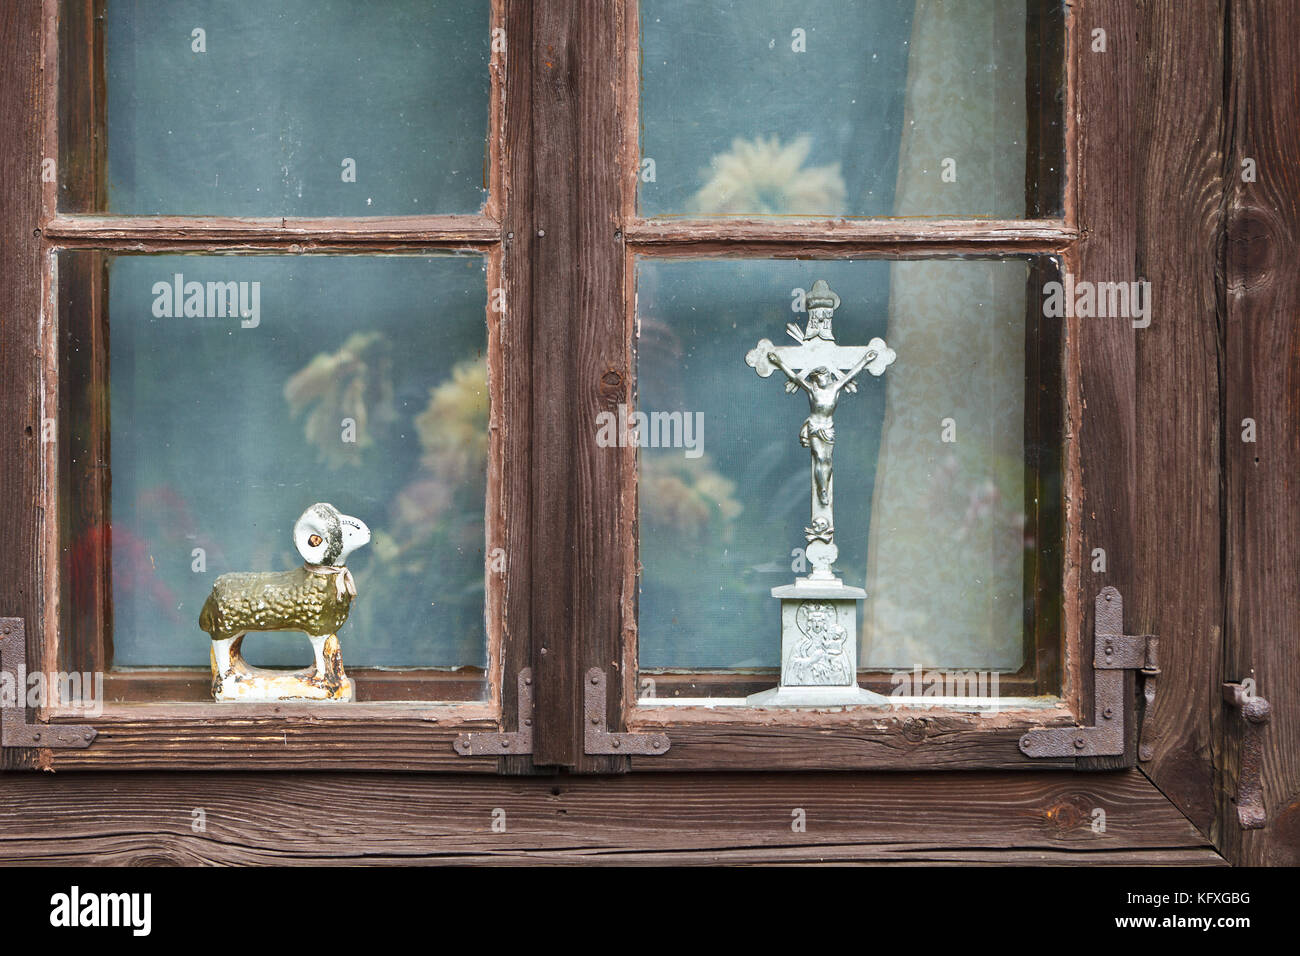 Jesus Christ on cross and lamb figurine in old wooden window Stock Photo